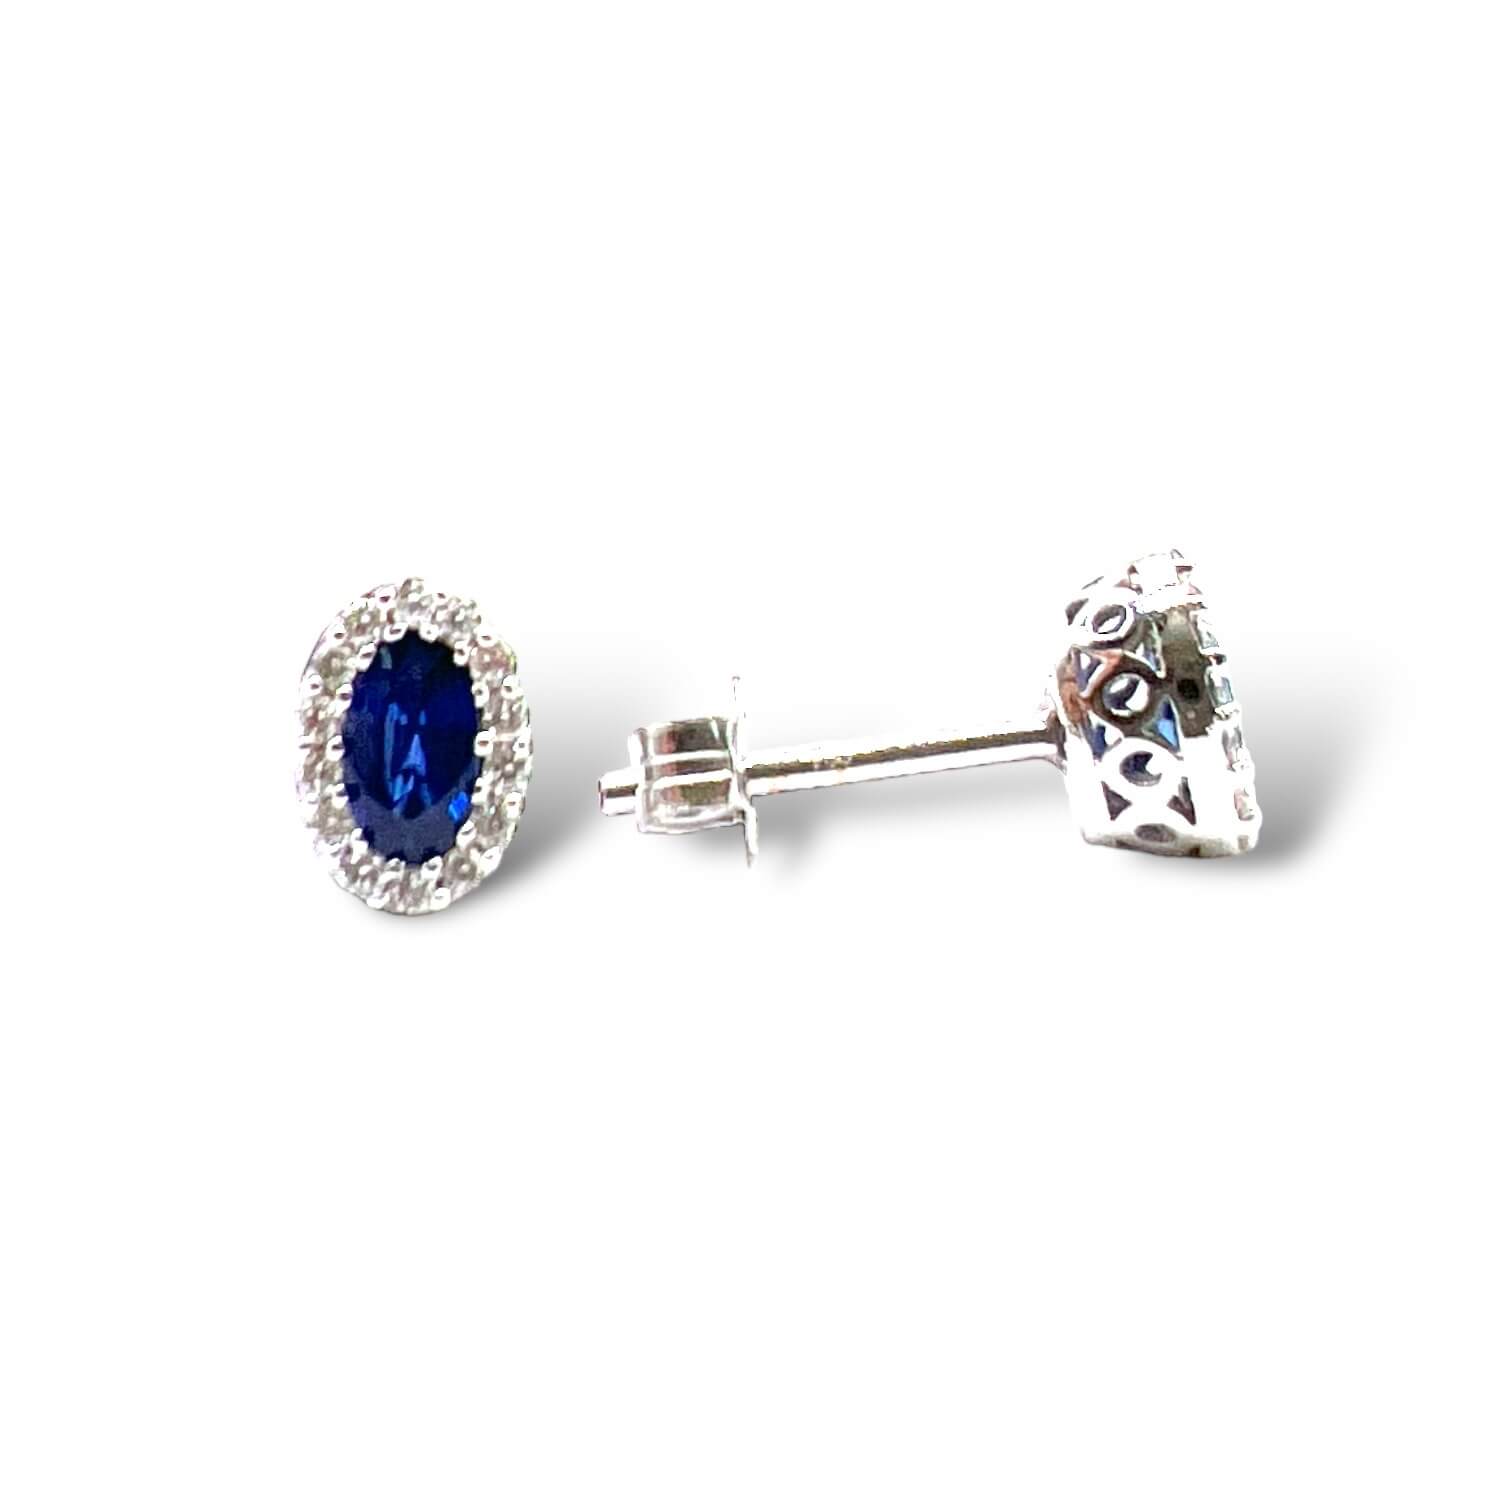 Sapphire Earrings Gold and Diamonds BELLE EPOQUE Art. OR1519